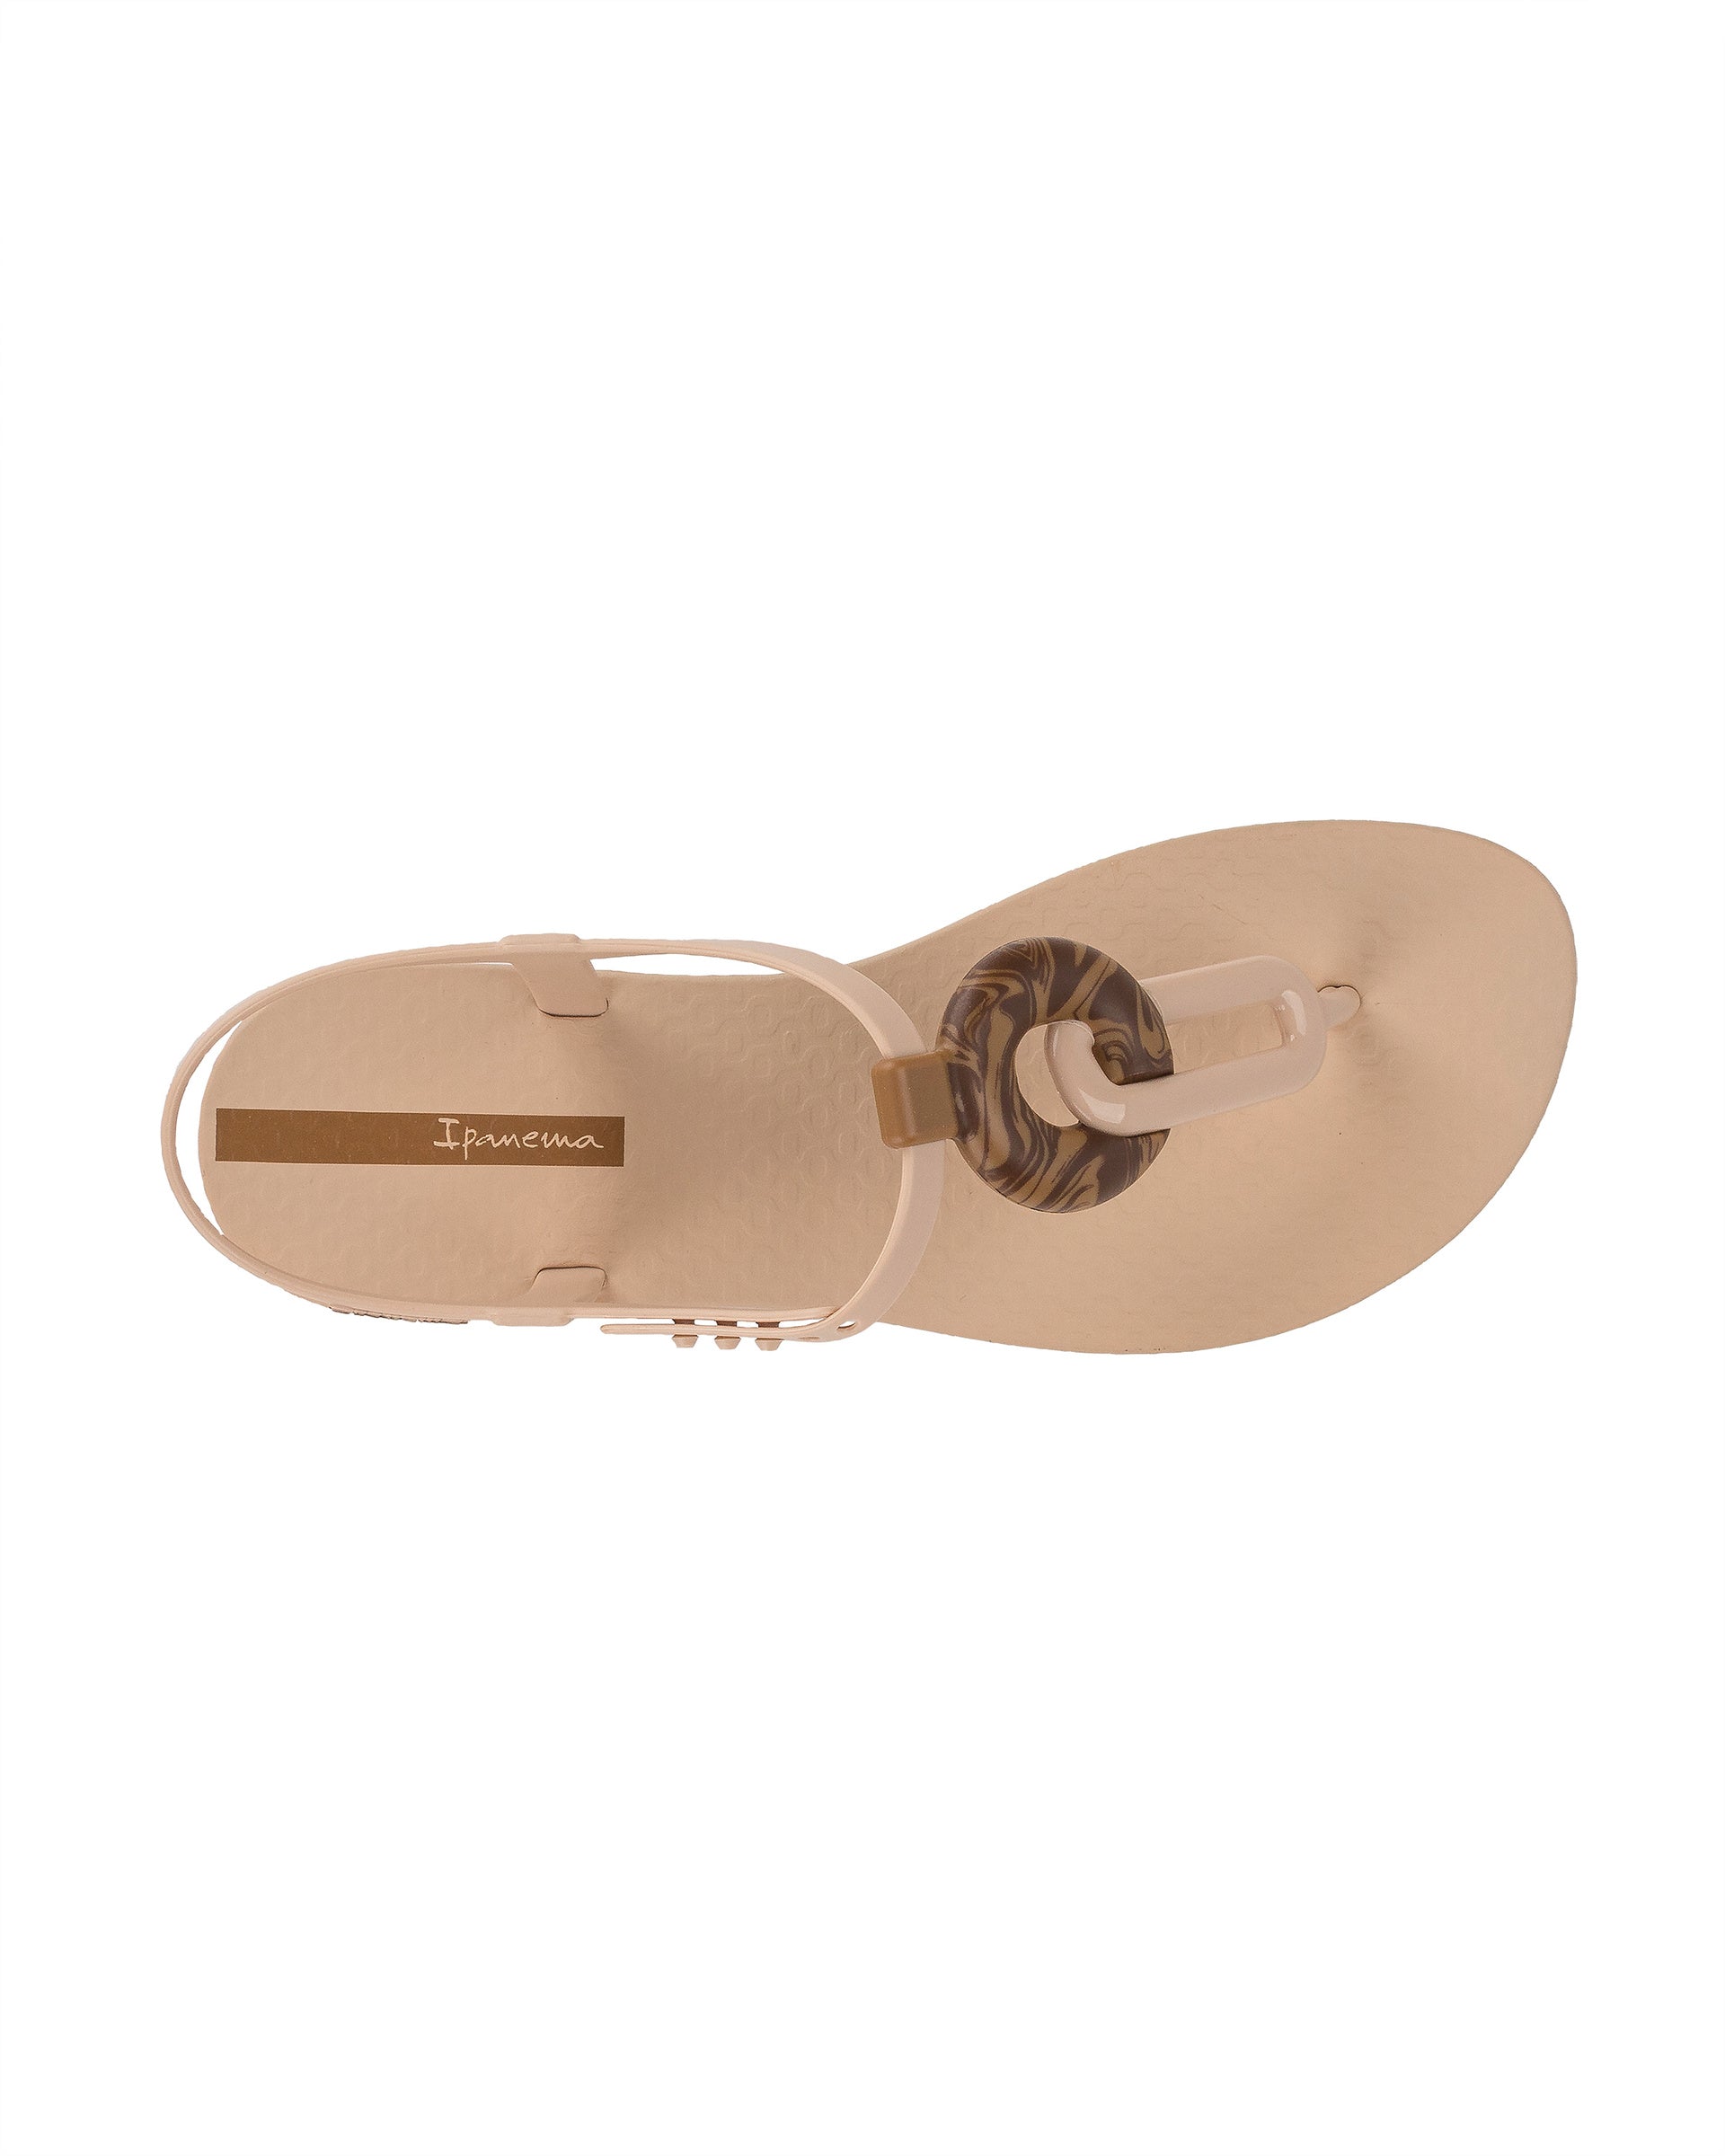 Top view of a beige Ipanema Class Marble women's t-strap sandal.